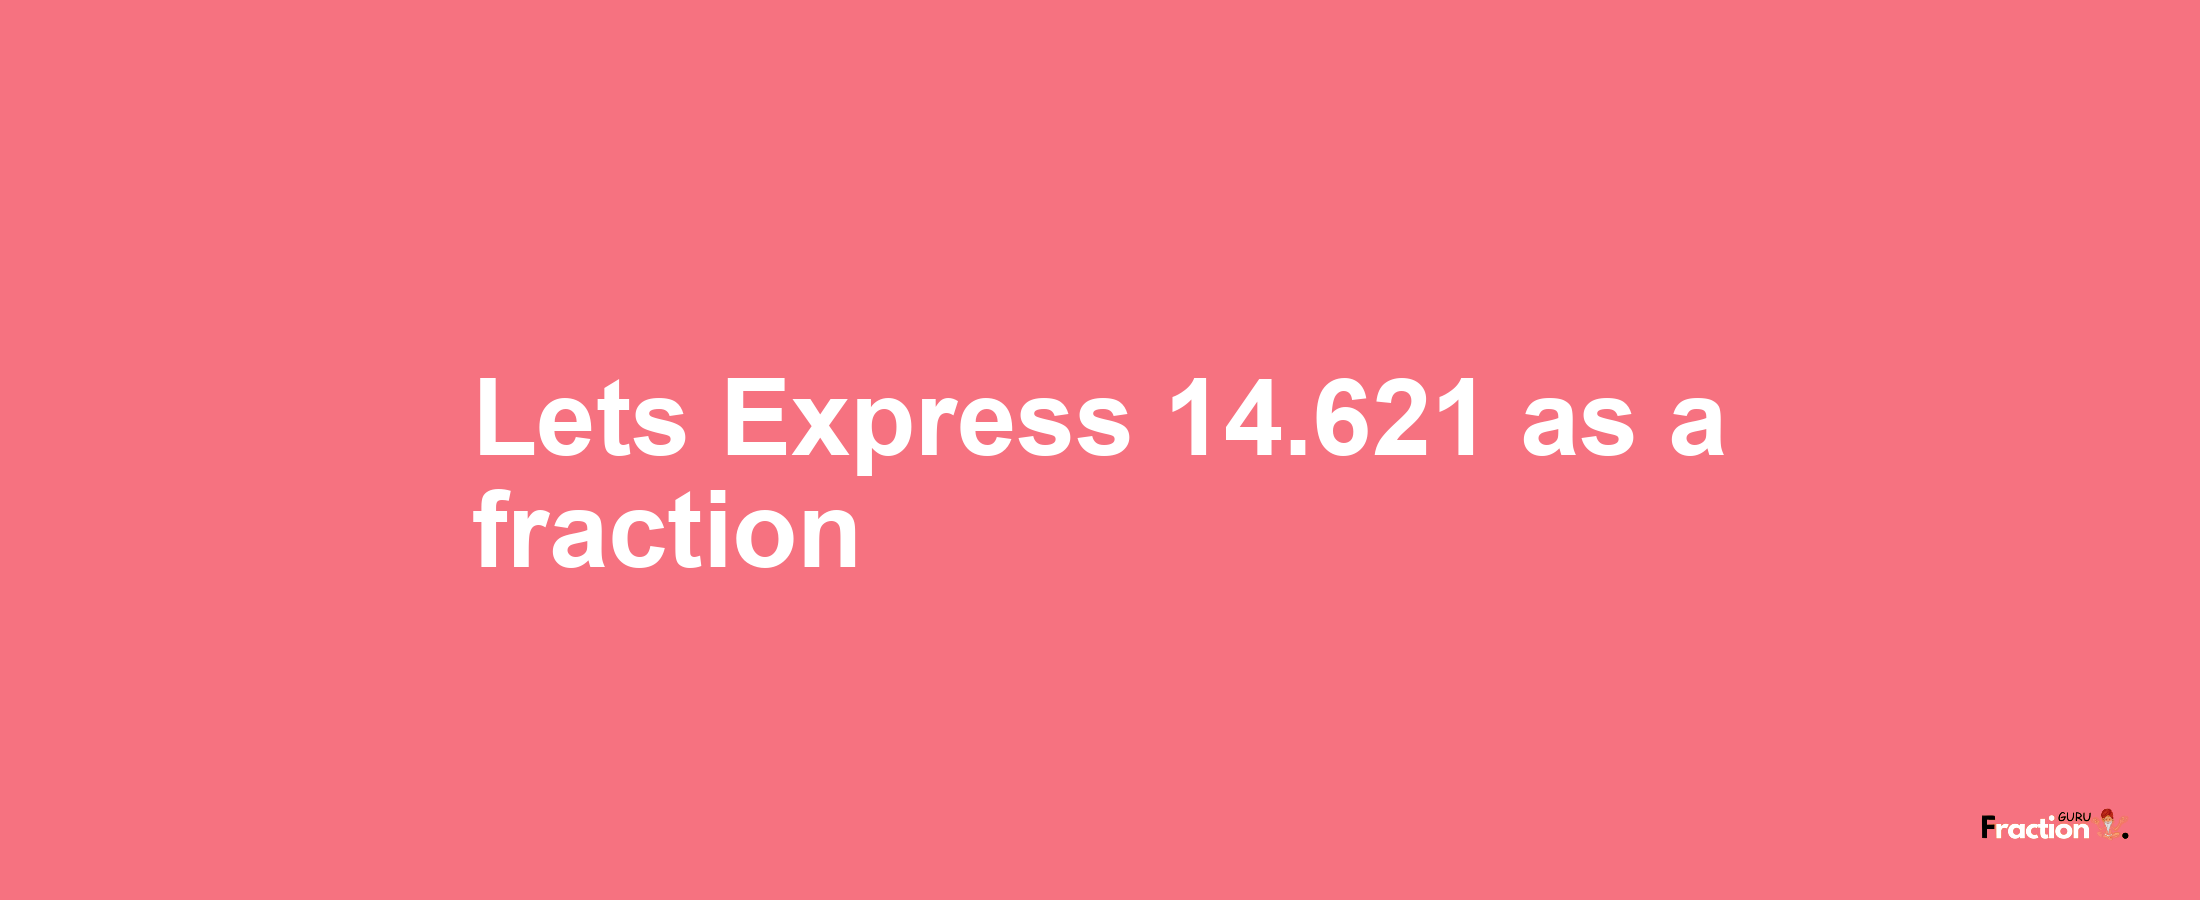 Lets Express 14.621 as afraction